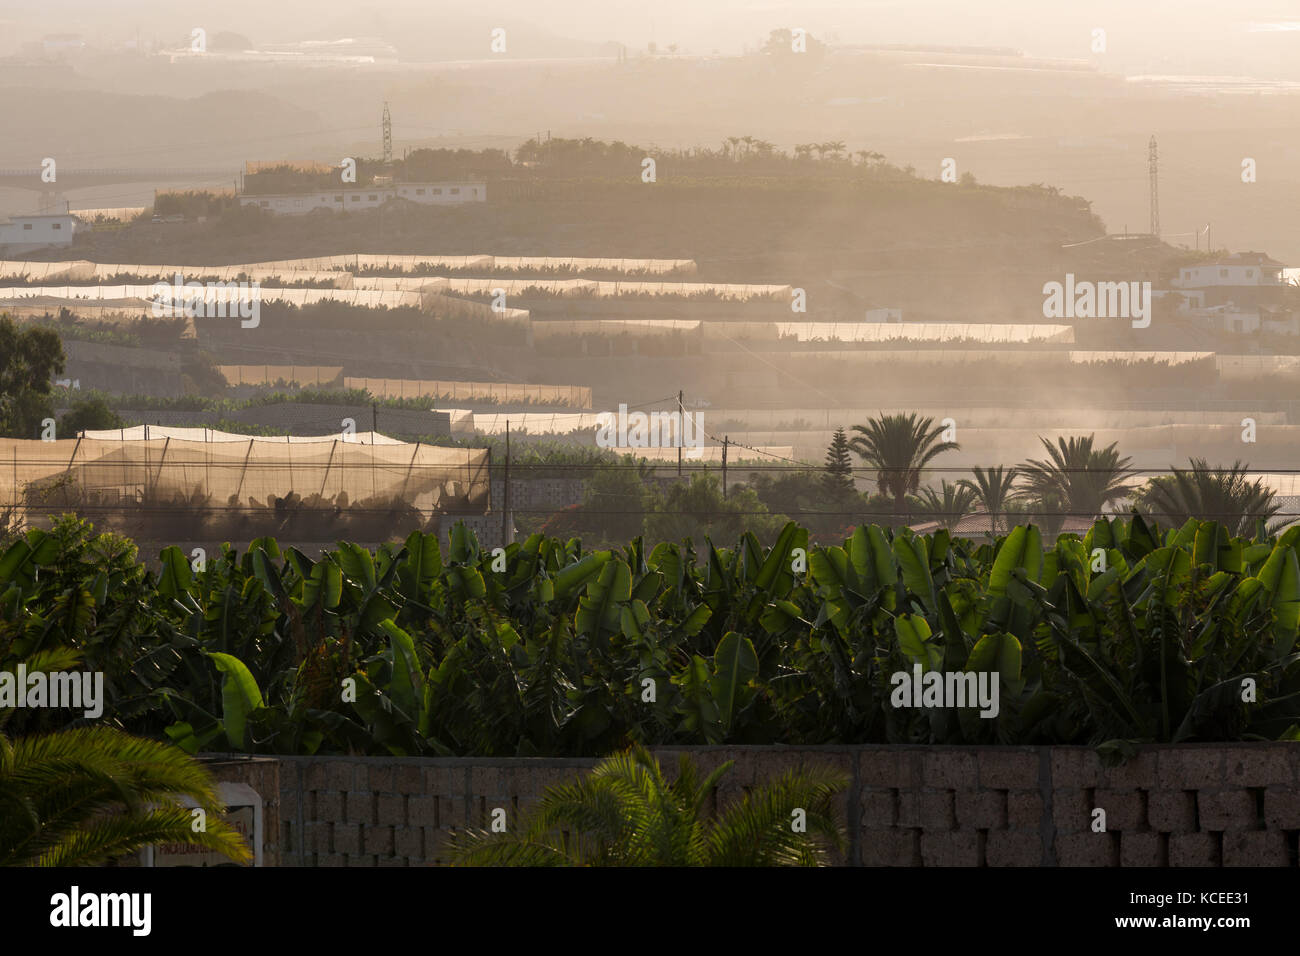 Backlit hazy misty dawn over banana plantations in the Guia de Isora region of Tenerife, with Teide in the background, Canary Islands, Spain Stock Photo